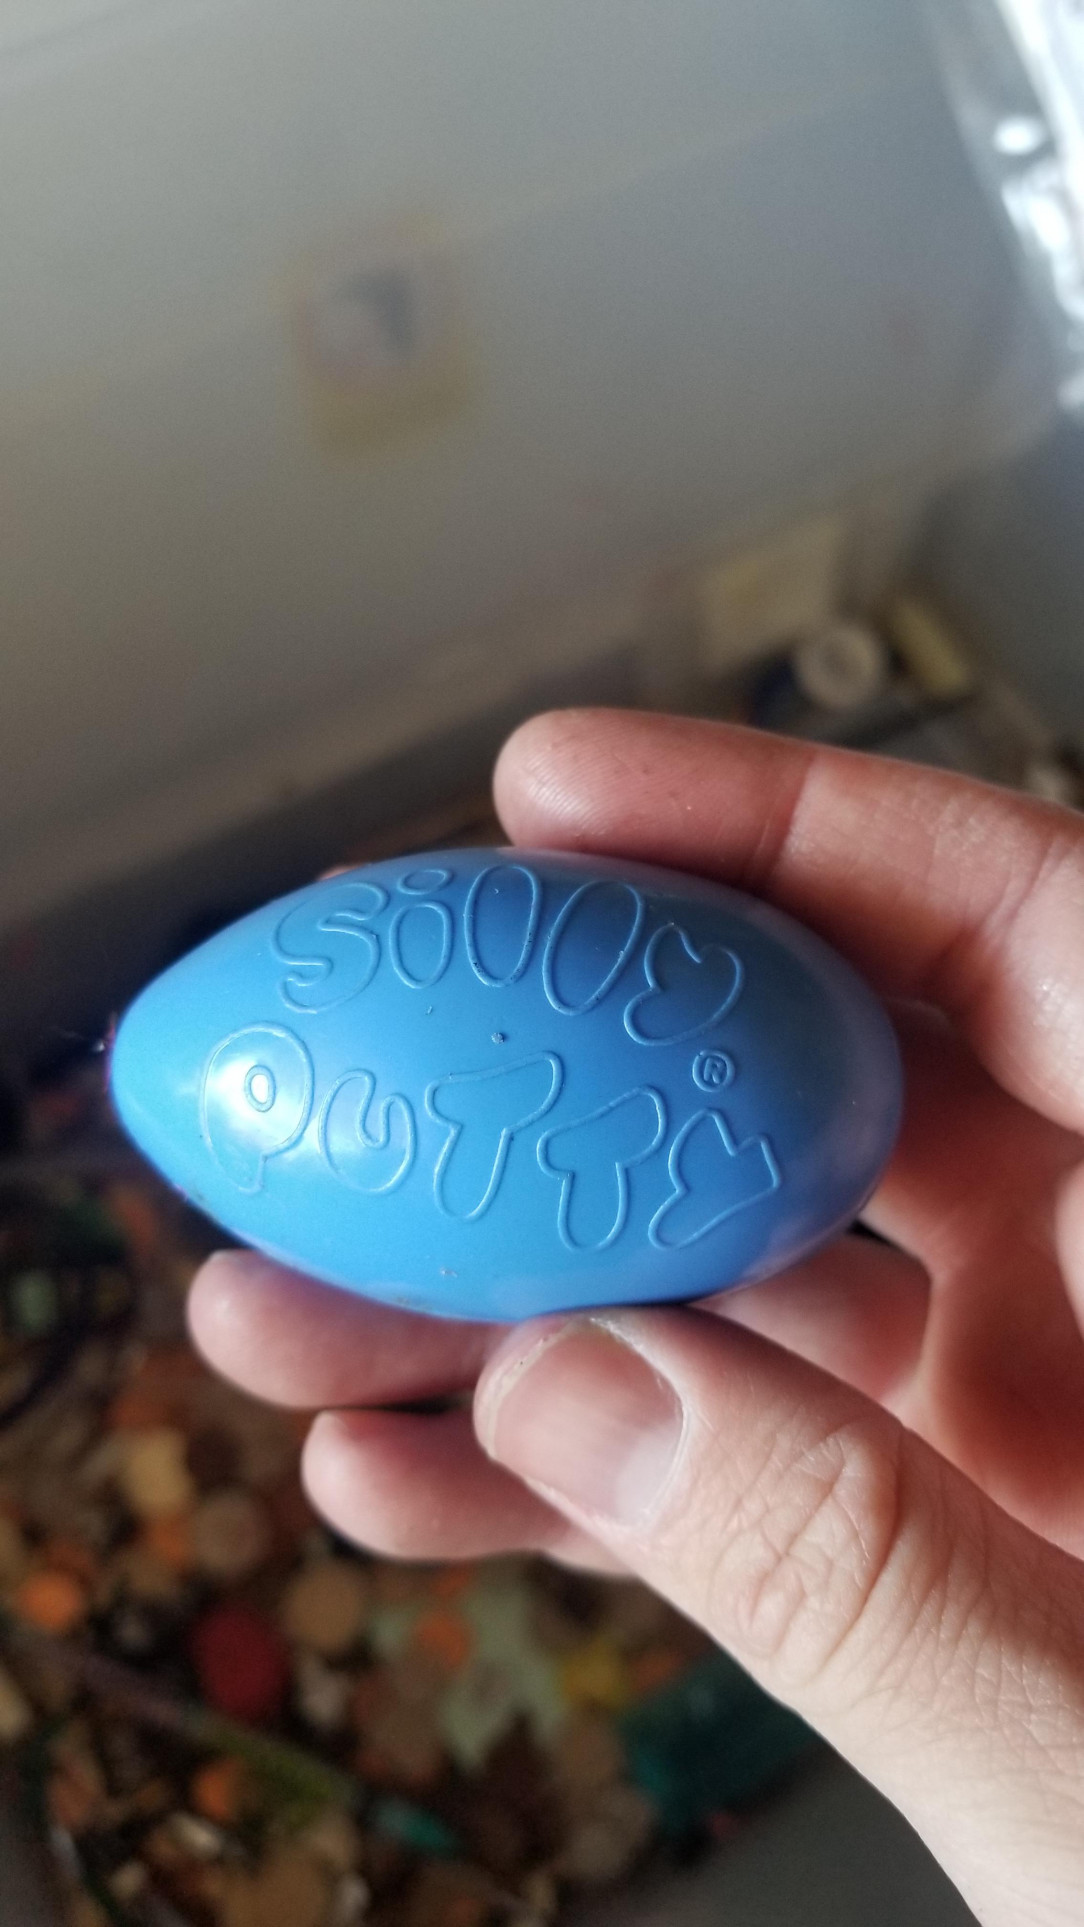 smuggling silly putty into your 5th grade elementary school class everyday